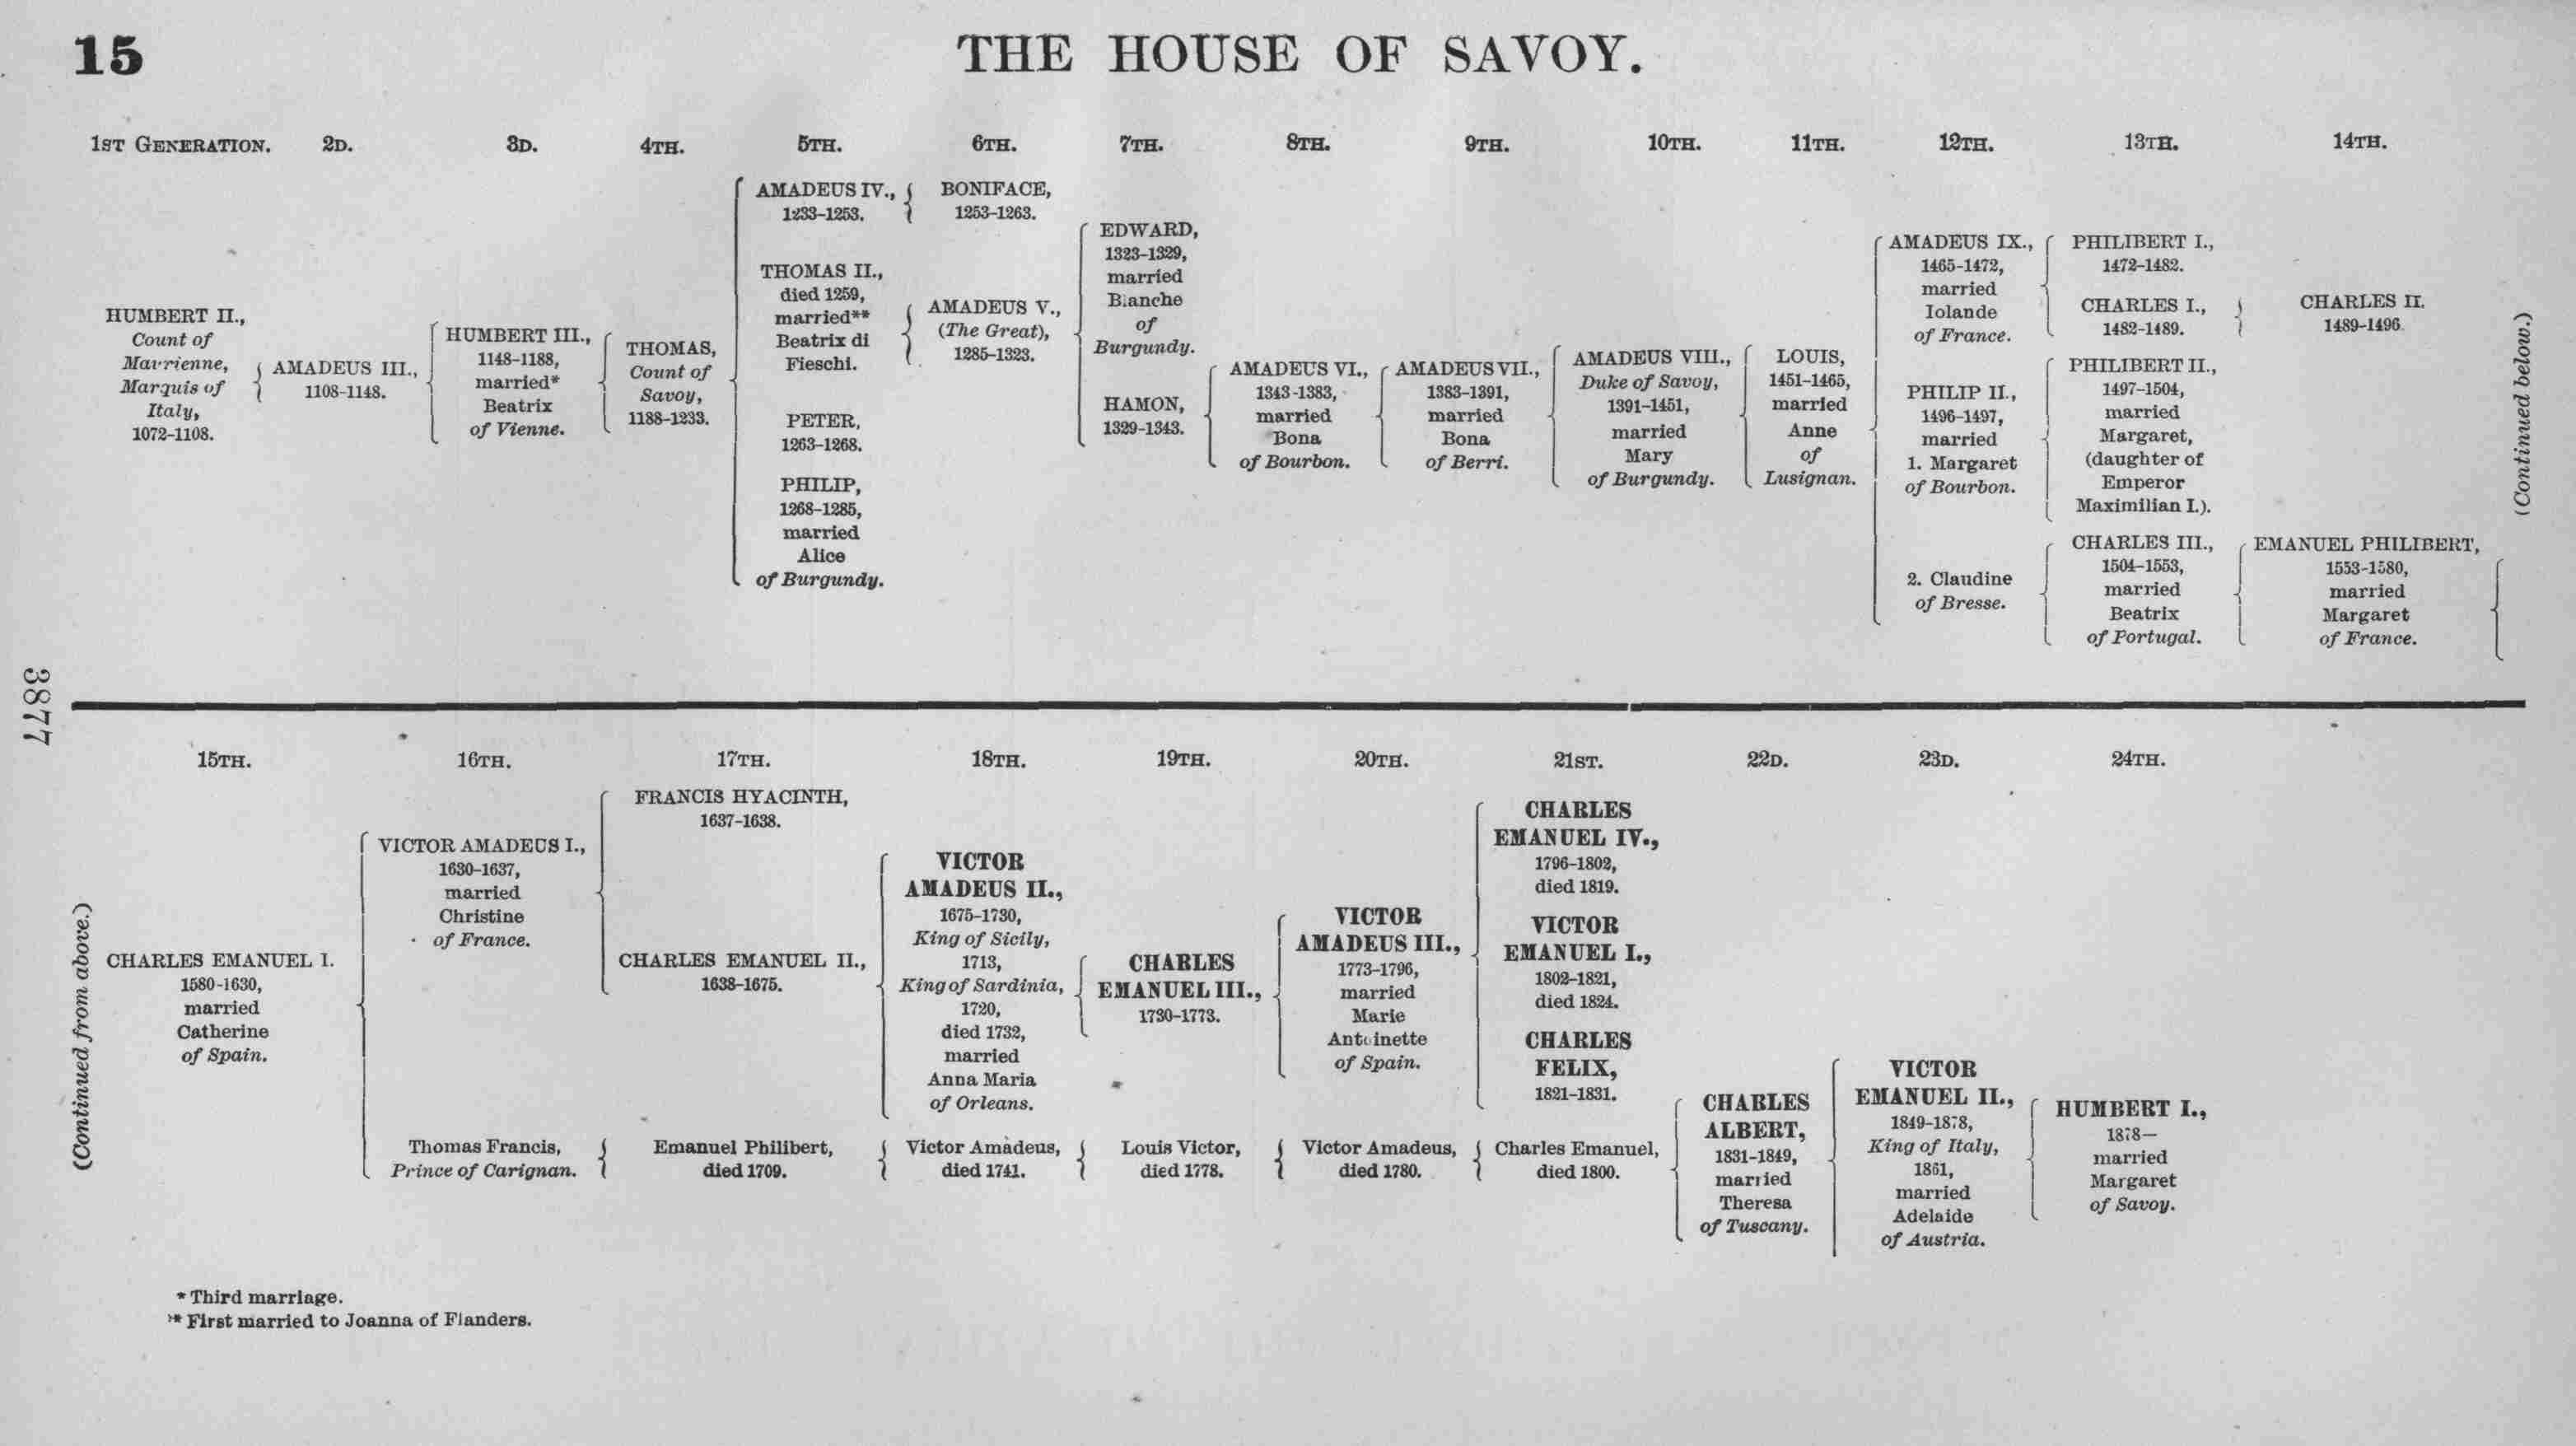 THE HOUSE OF SAVOY.